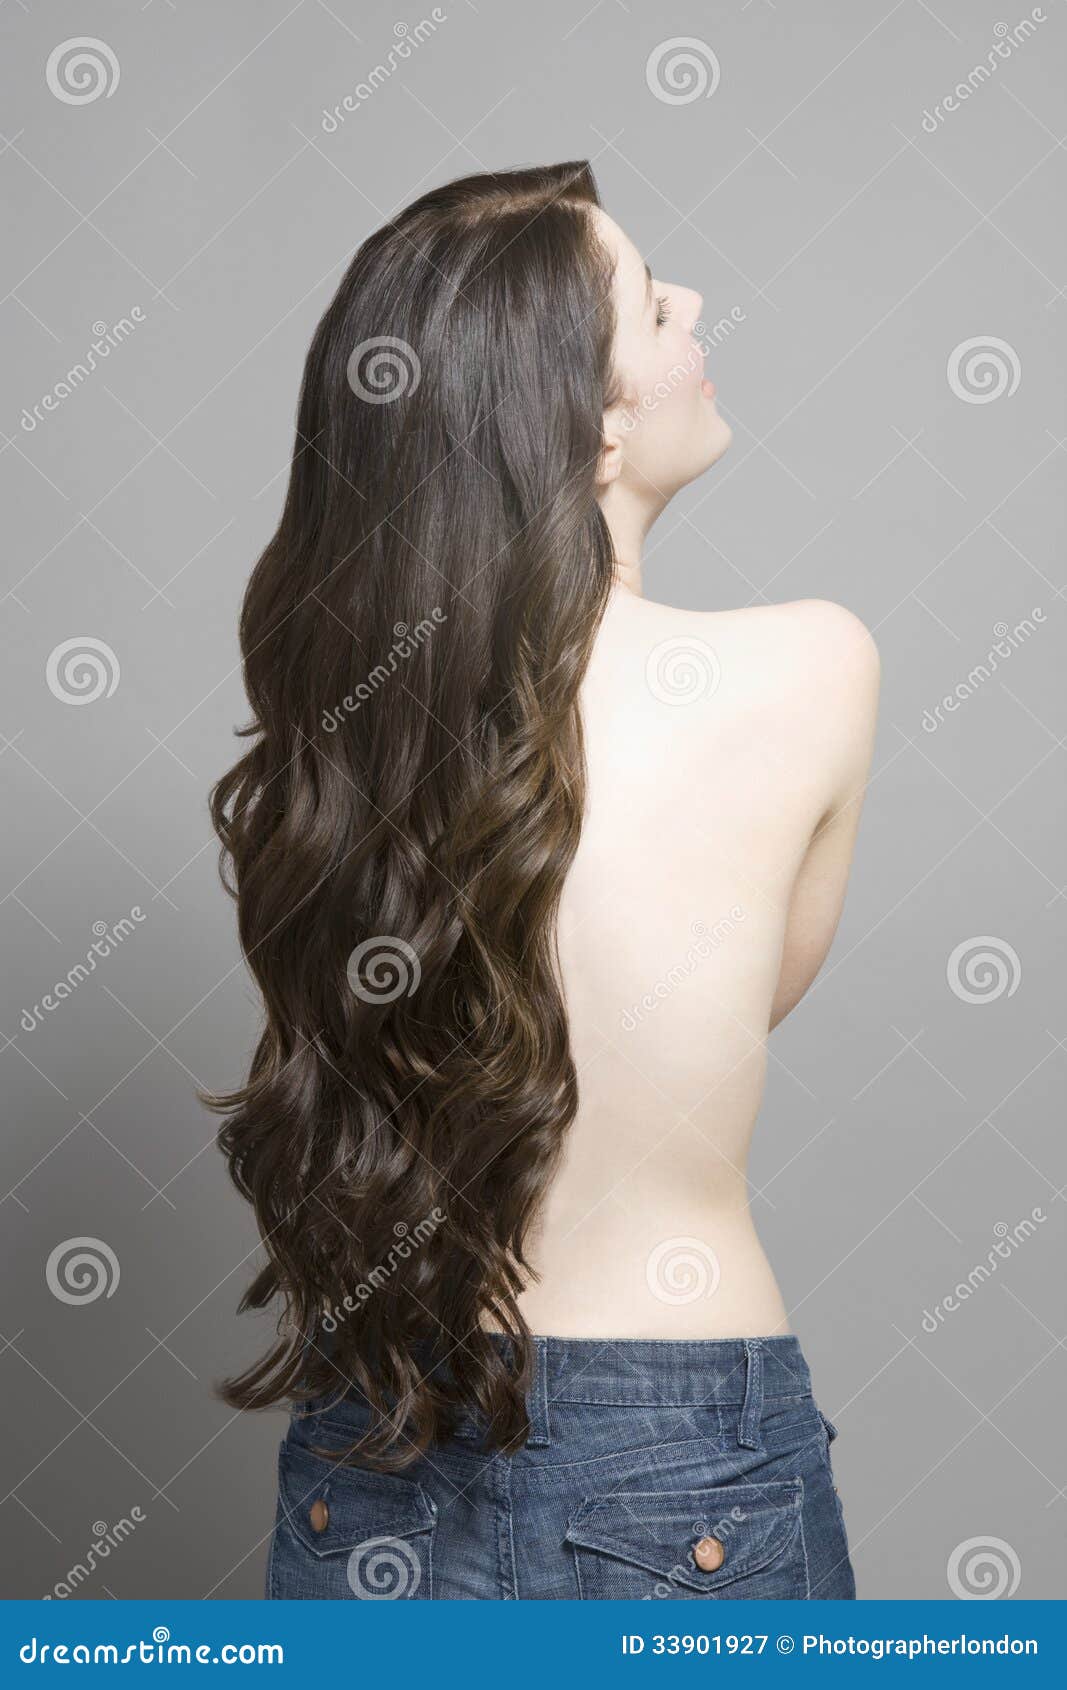 Aggregate more than 157 why women have long hair